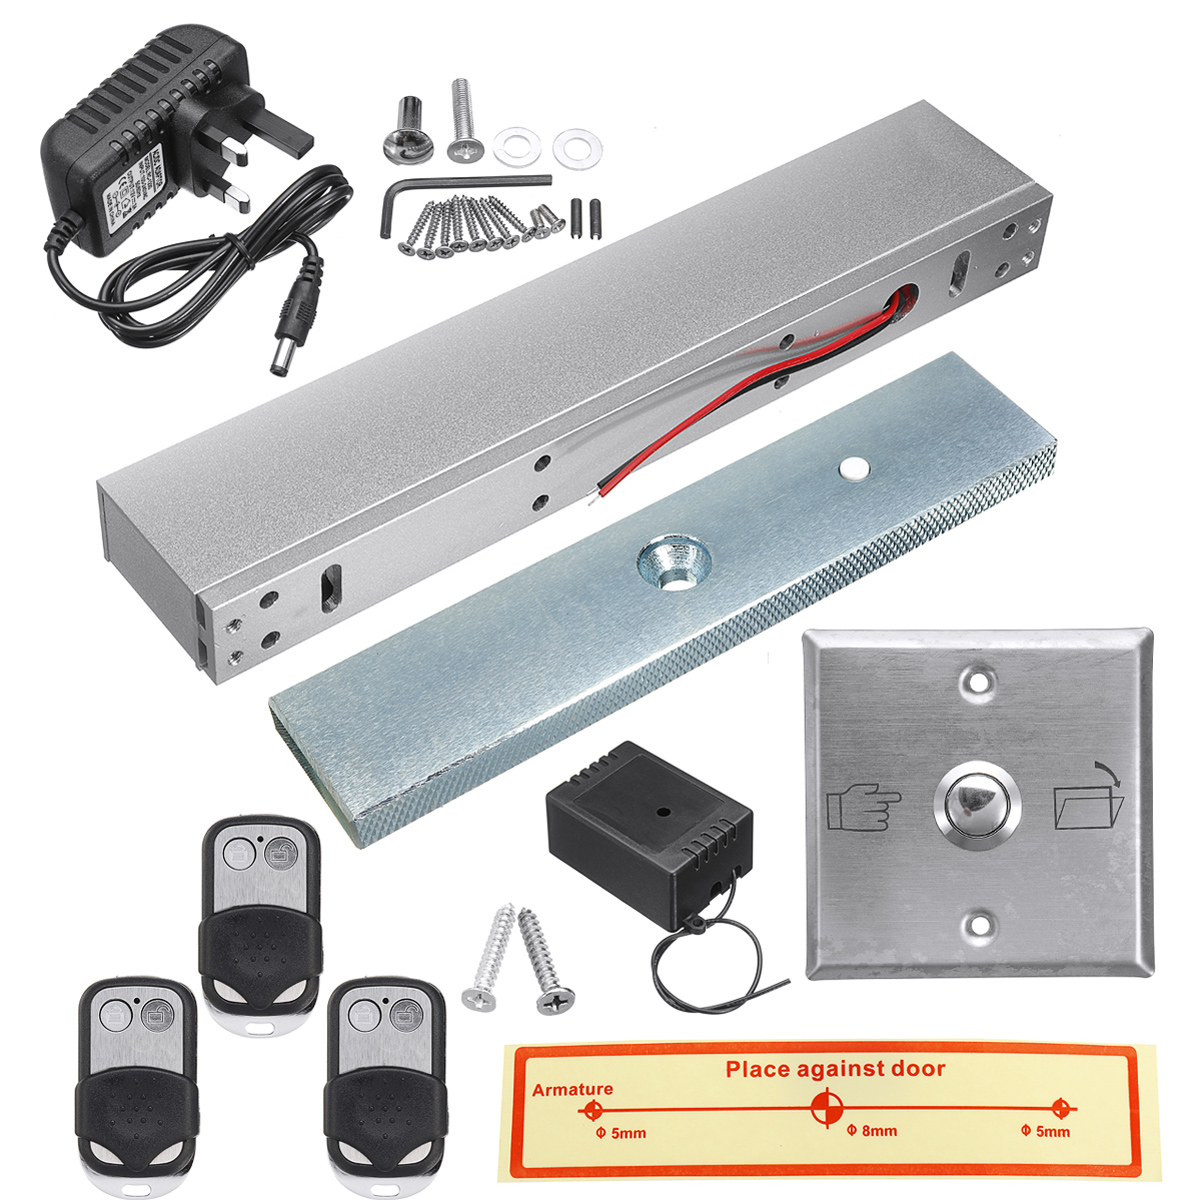 Door-Access-Control-System-Electric-Magnetic-Door-Lock-with-3-Remote-Controls-1549557